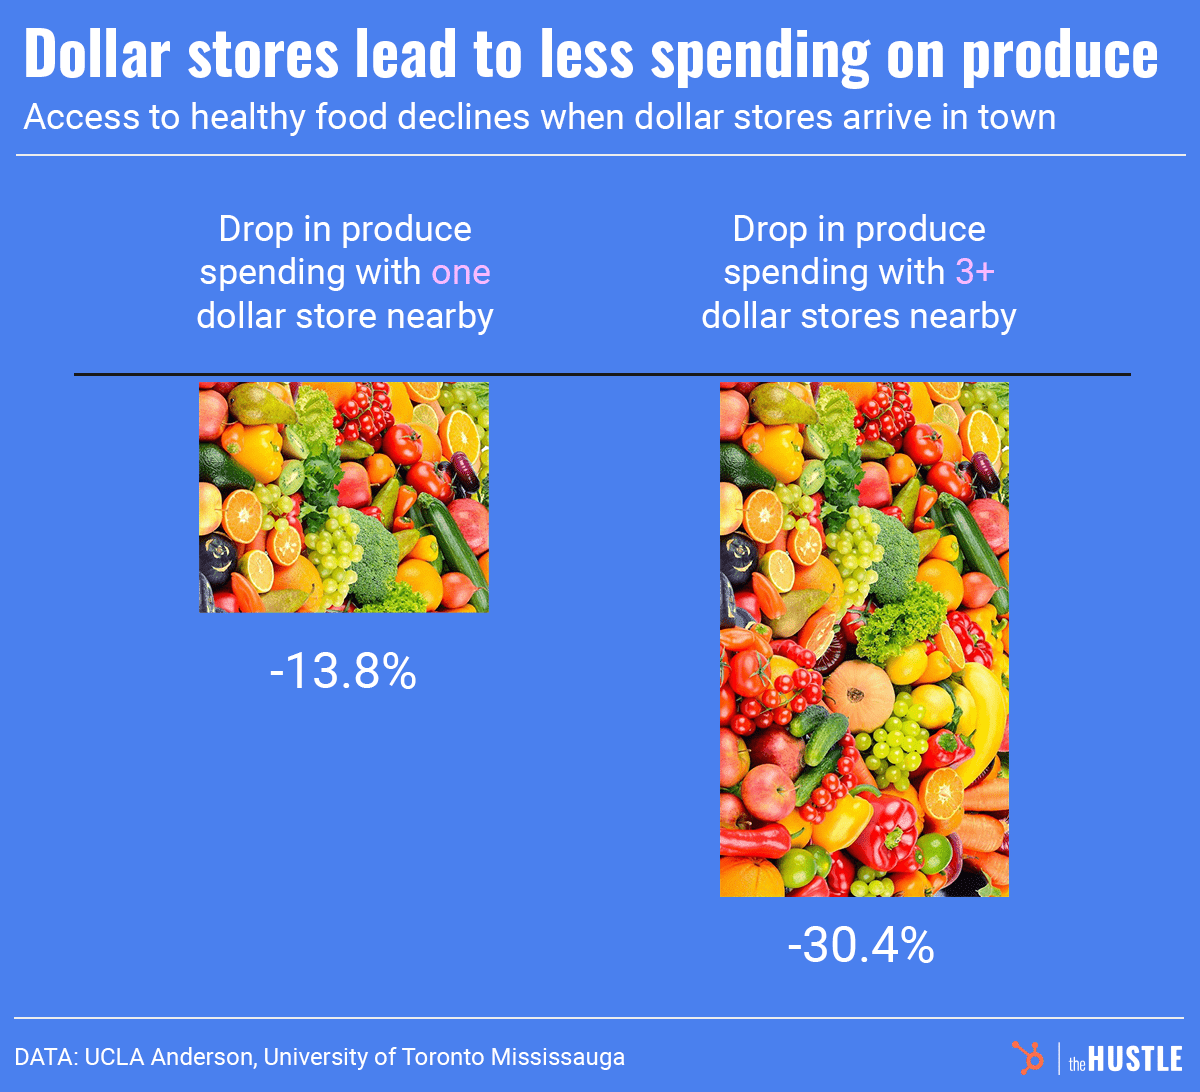 drop in produce spending when dollar stores arrive in town